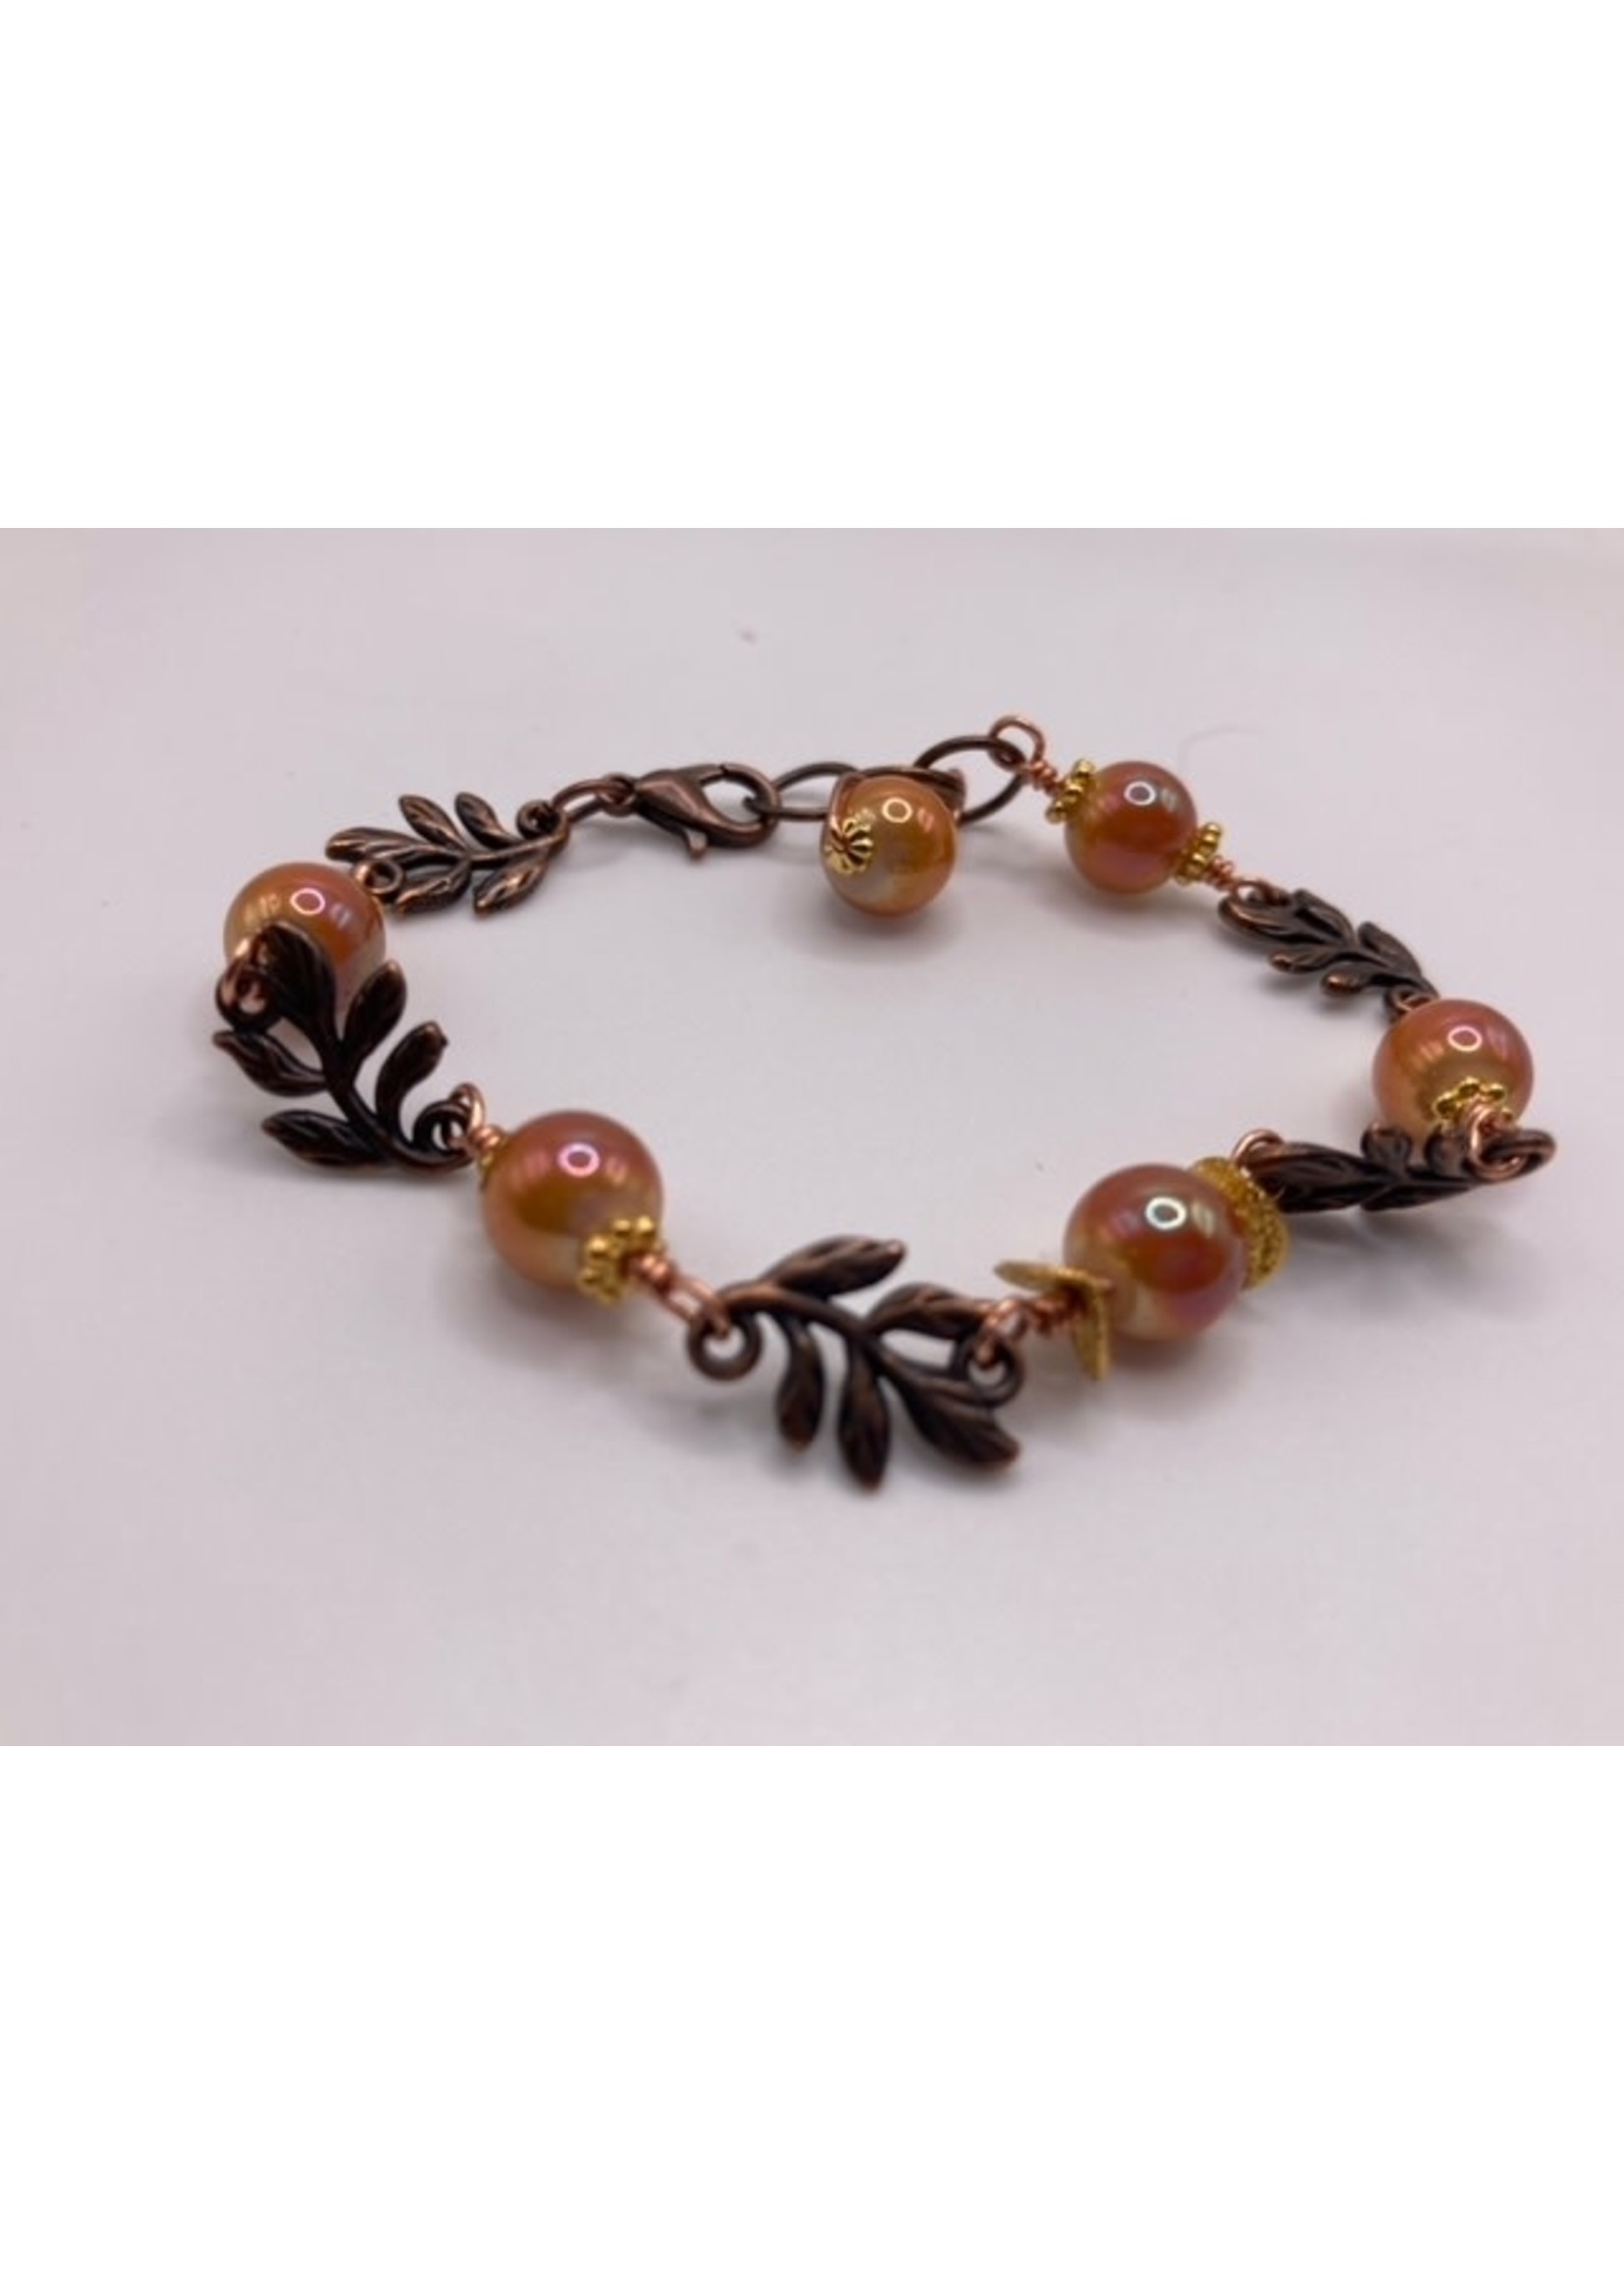 Bronze Leaf Bracelet with Gold spacer Beads and Orange Pearl Sheen - My New  Favorite Thing Decor